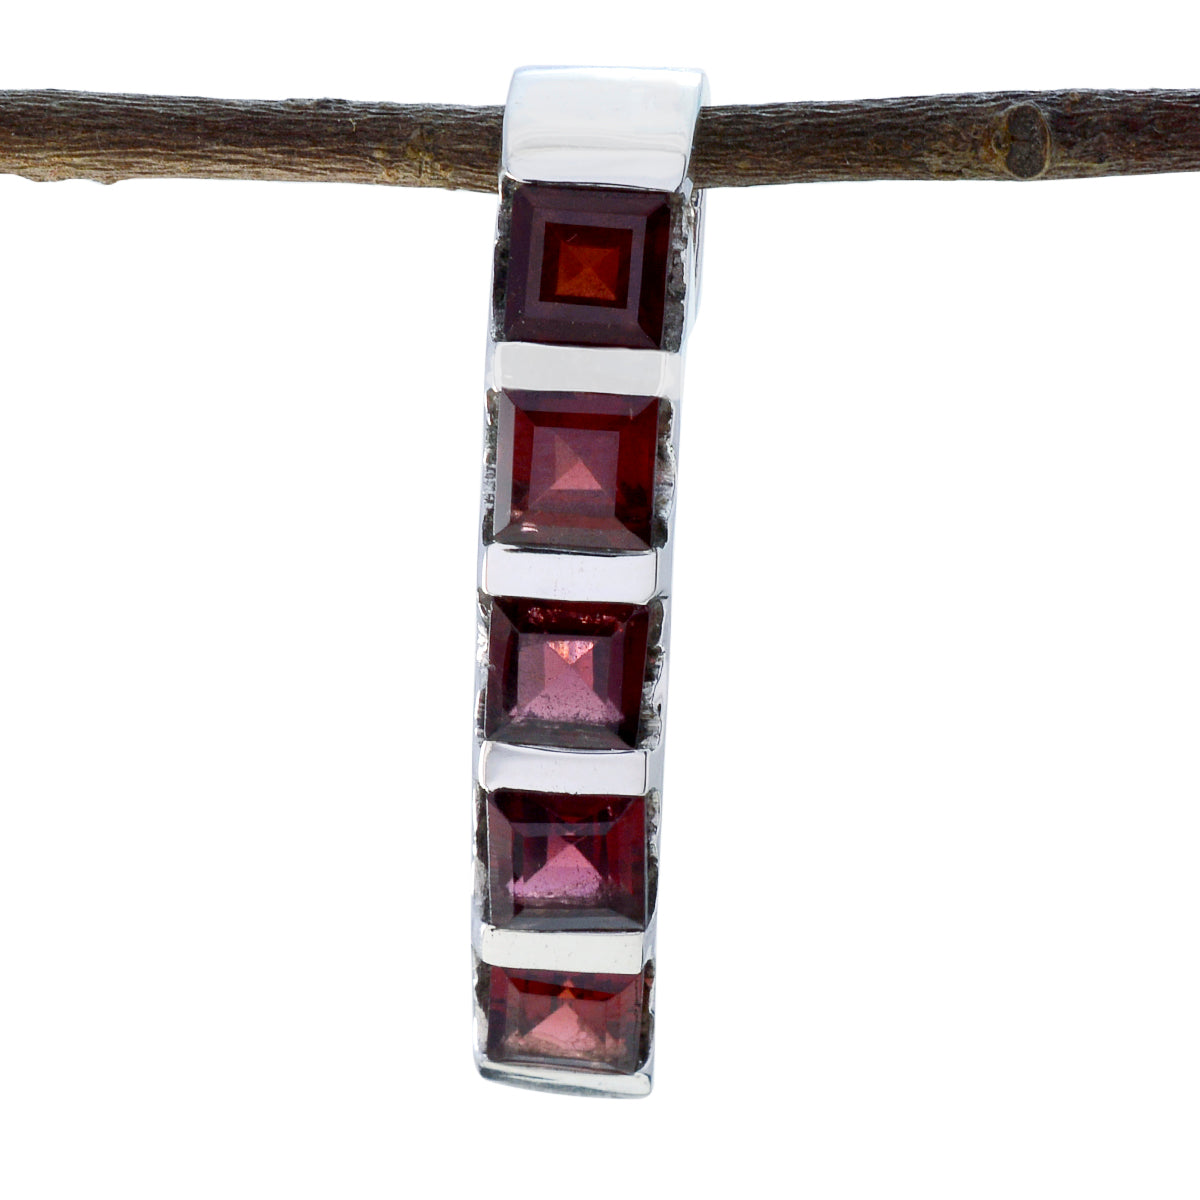 Riyo Natural Gemstone Square Faceted Red Garnet Sterling Silver Pendant gift fordaughter day